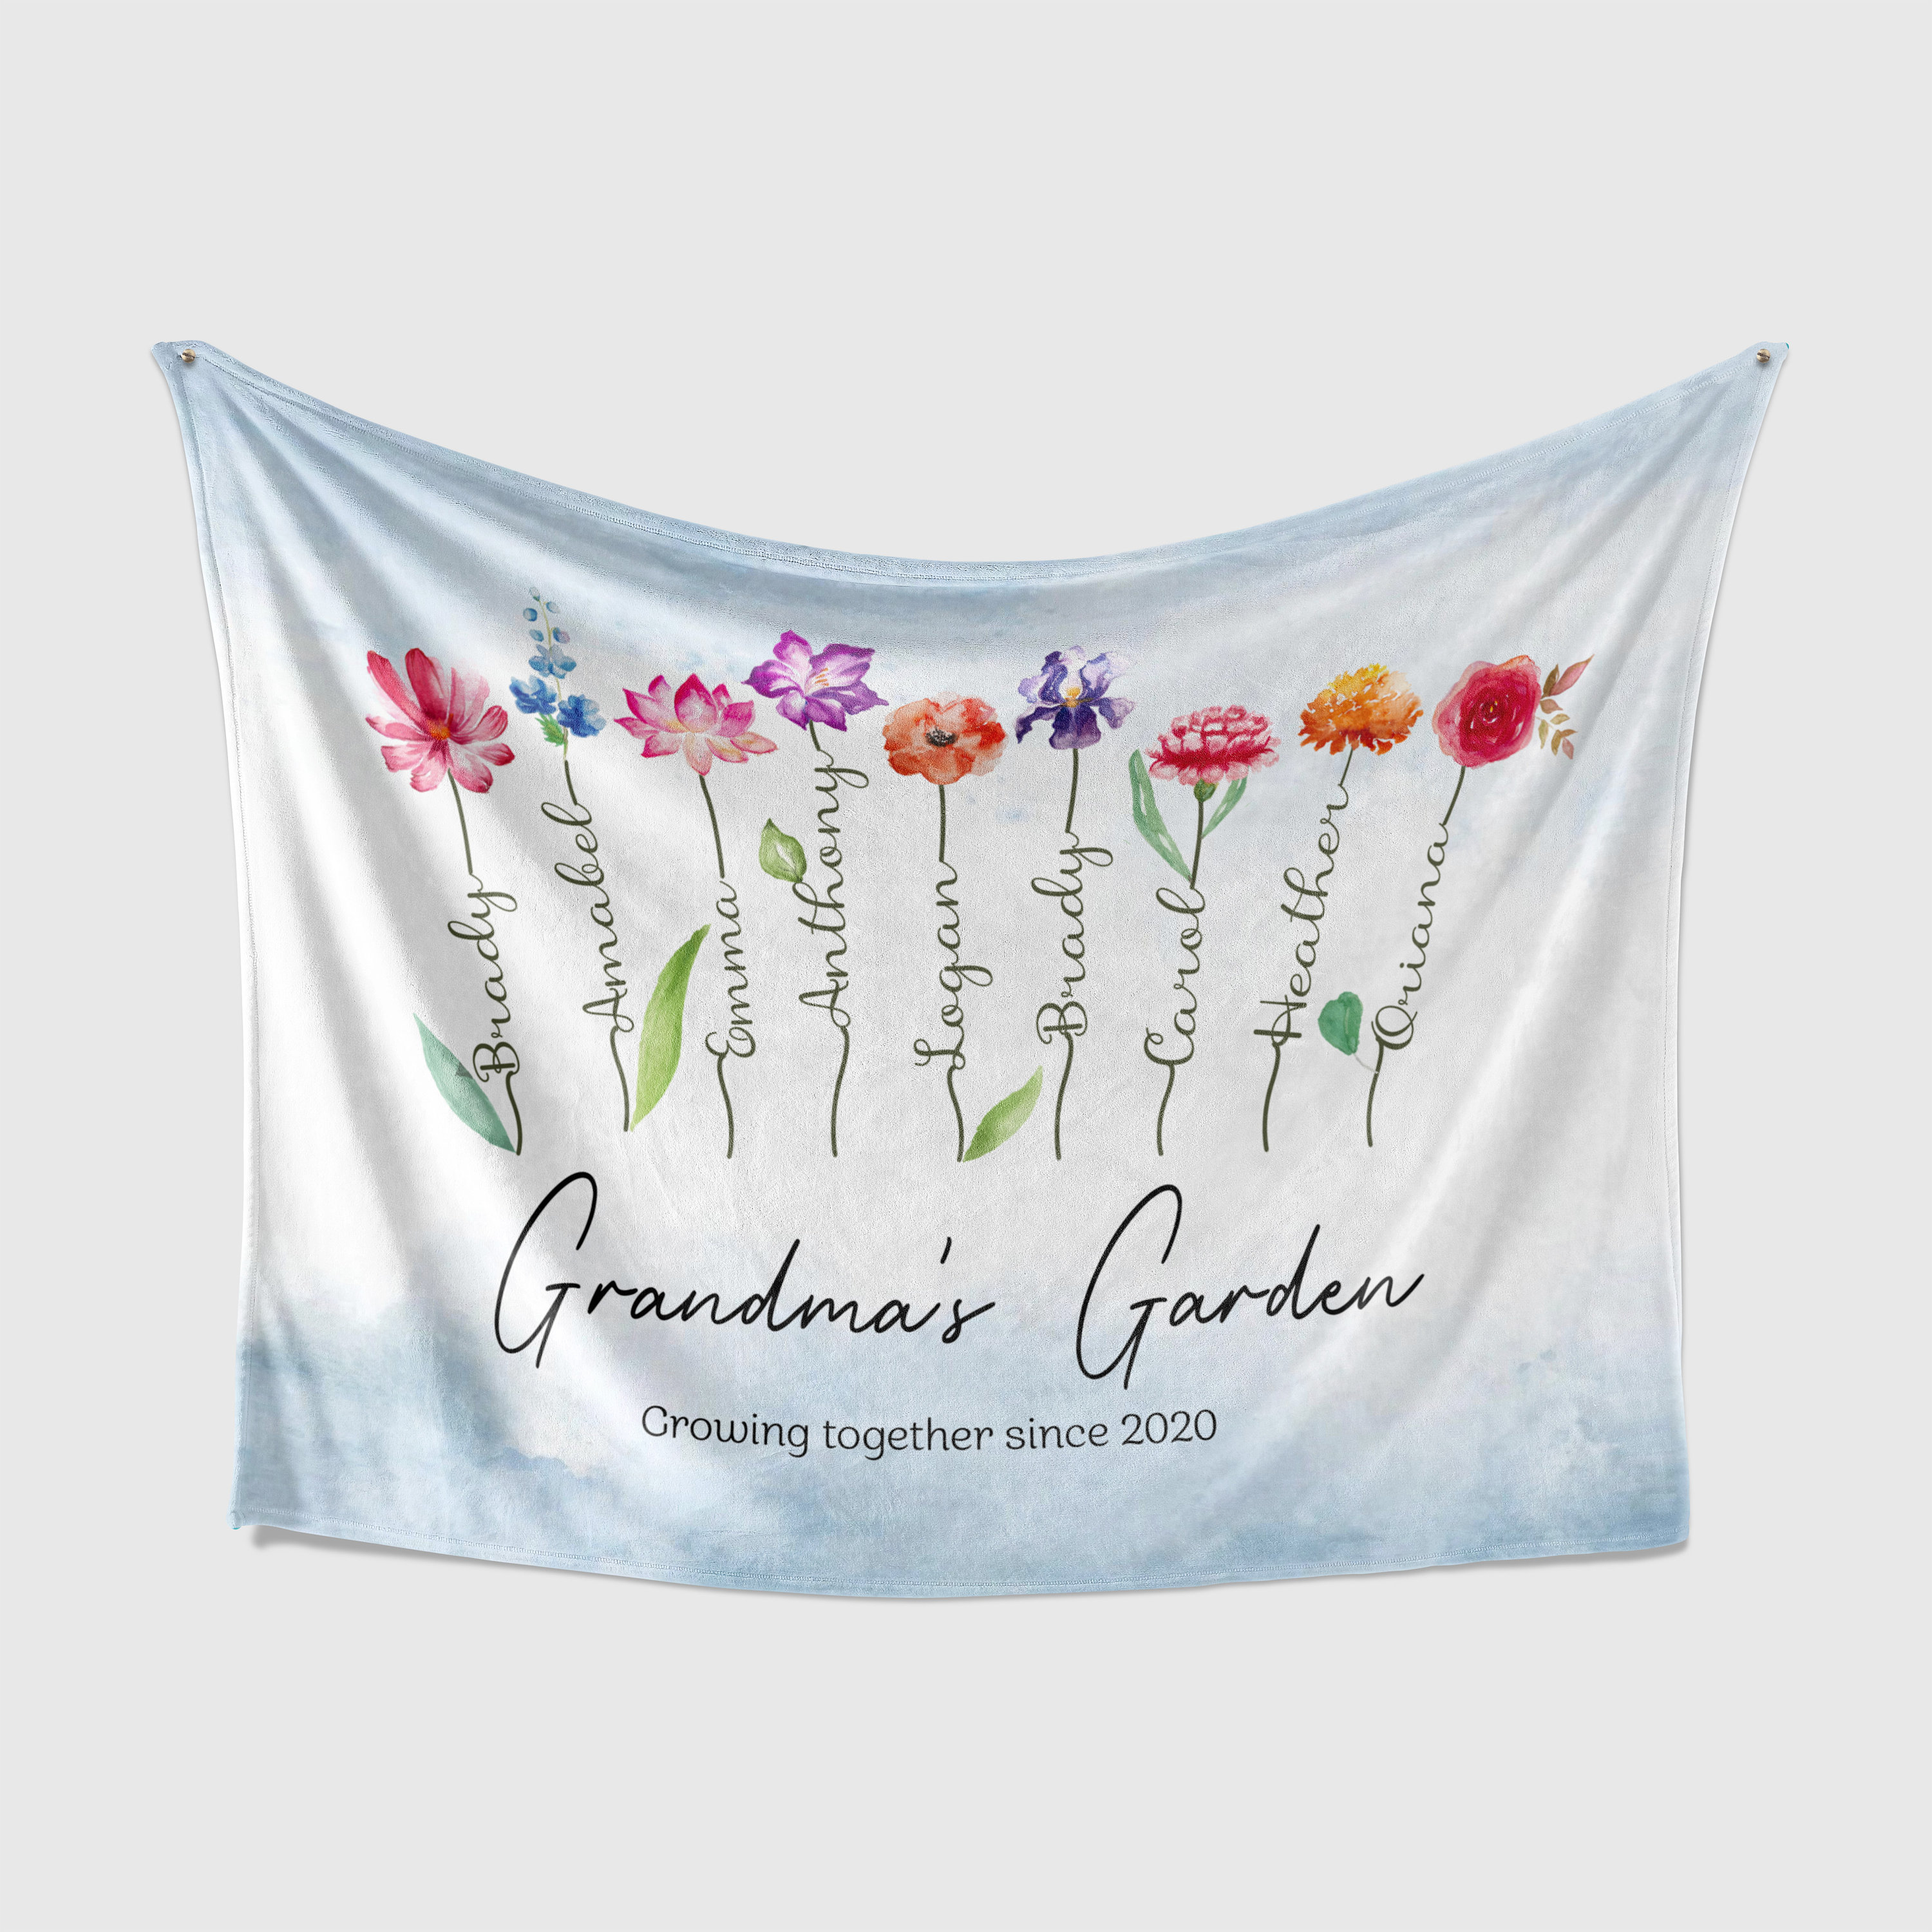 Grandma Gifts from Grandchildren, Mothers Day Birthday Gifts for Grandma,  Best Gift for Grandma from Granddaughter, Thoughtful Grandmother Gift Ideas  Throw Blanket 60 x 50 Inch 